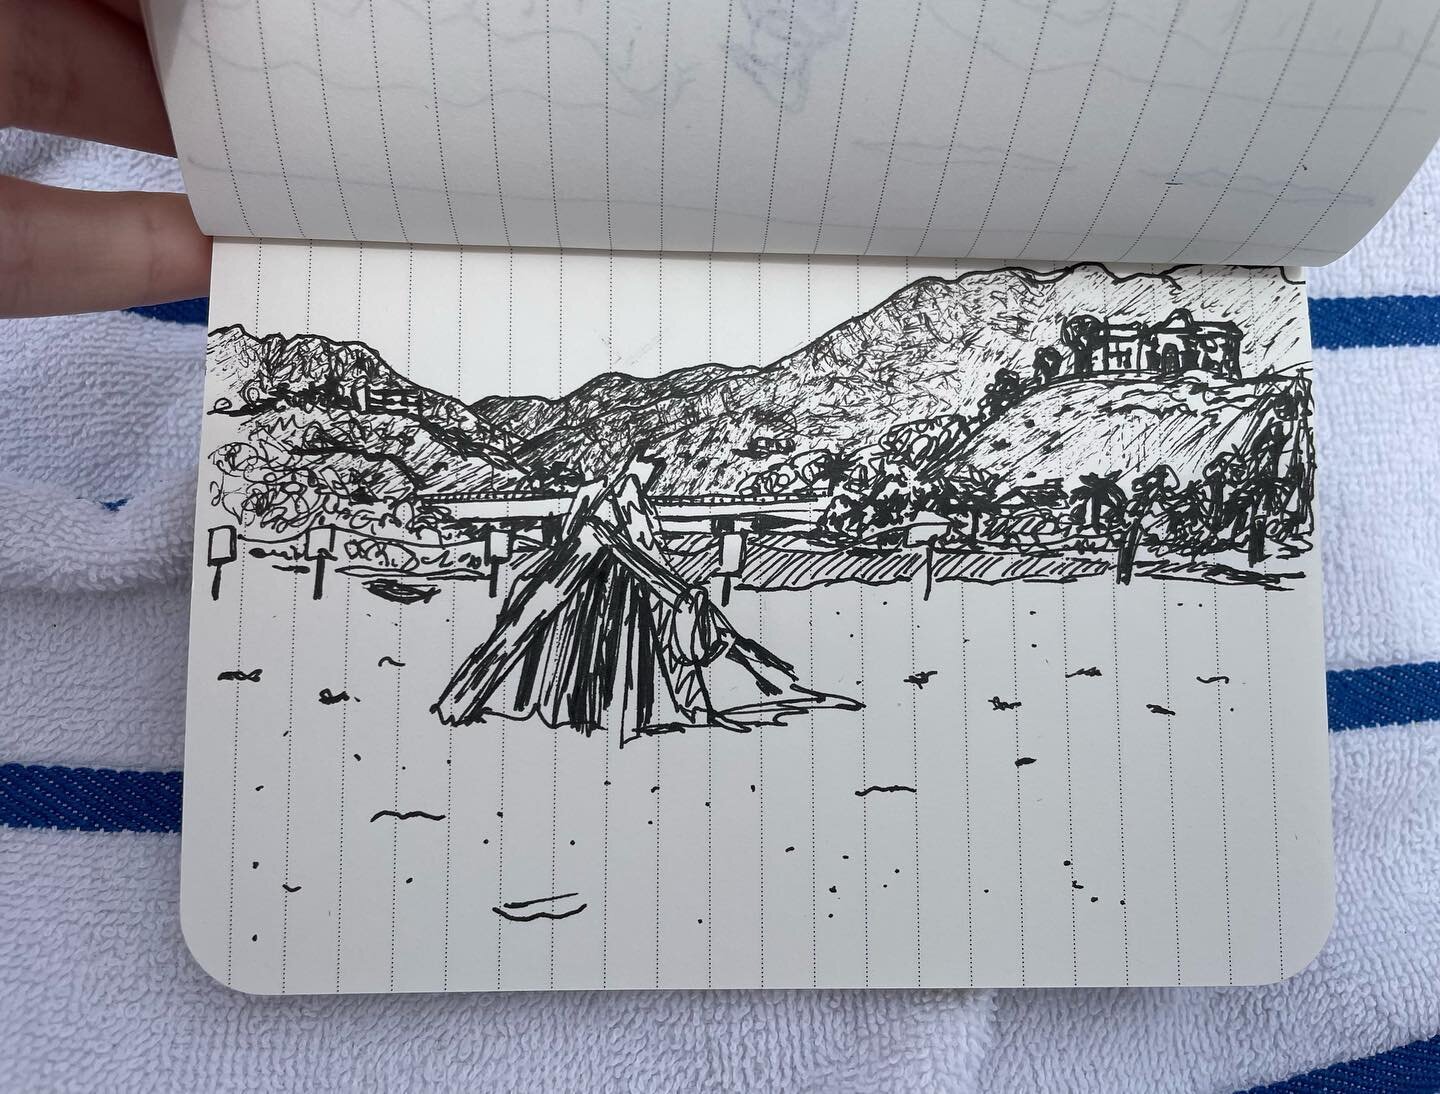 Sketches from places I went solo this weekend. Malibu Lagoon and Huntington Gardens. They&rsquo;re not good sketches but they were fun attempts. Bad art is better than no art.